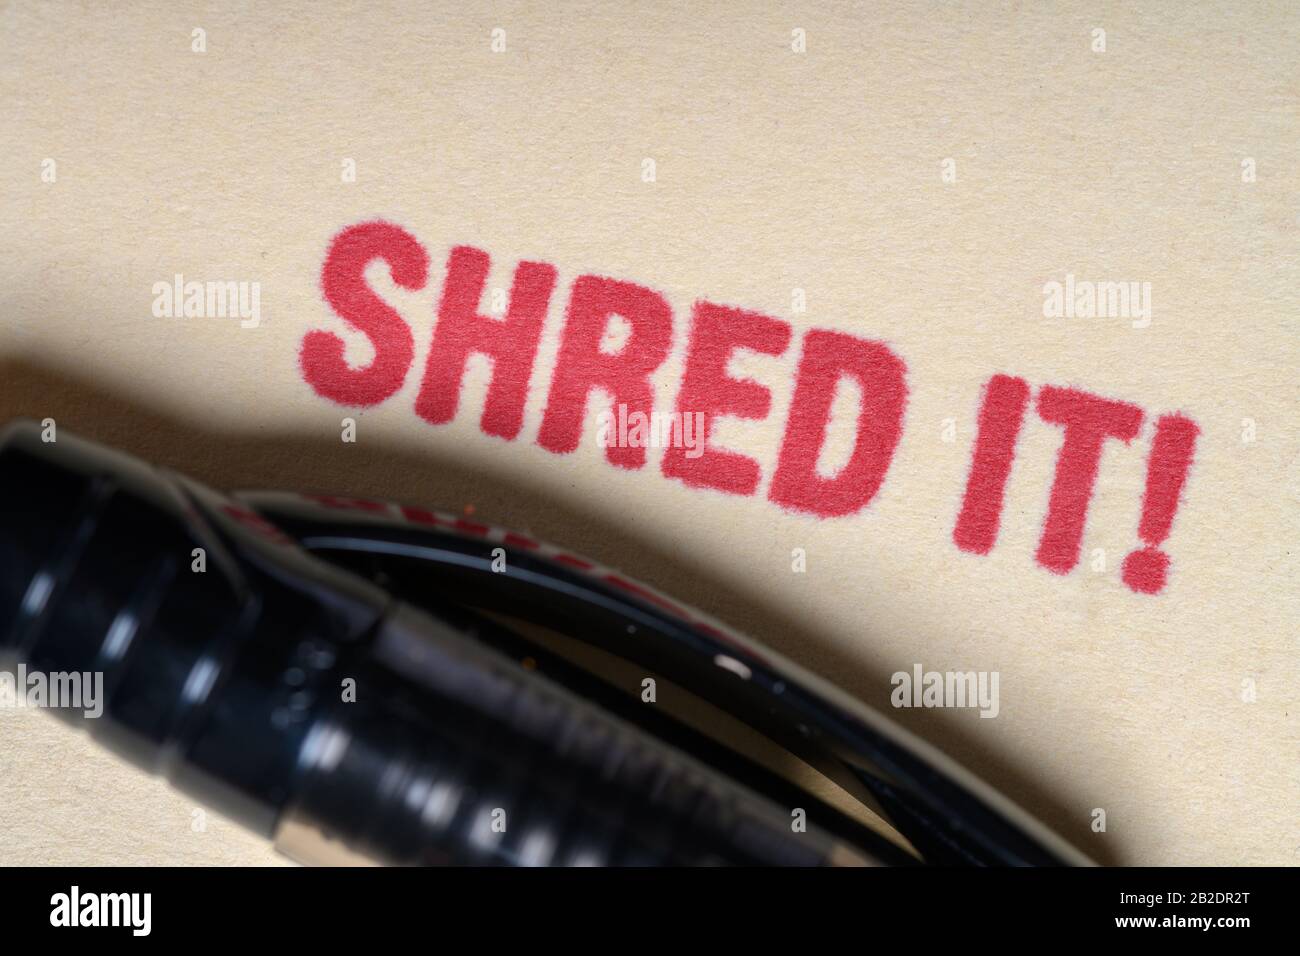 SHRED IT stamped on manilla file folder- privacy concept Stock Photo